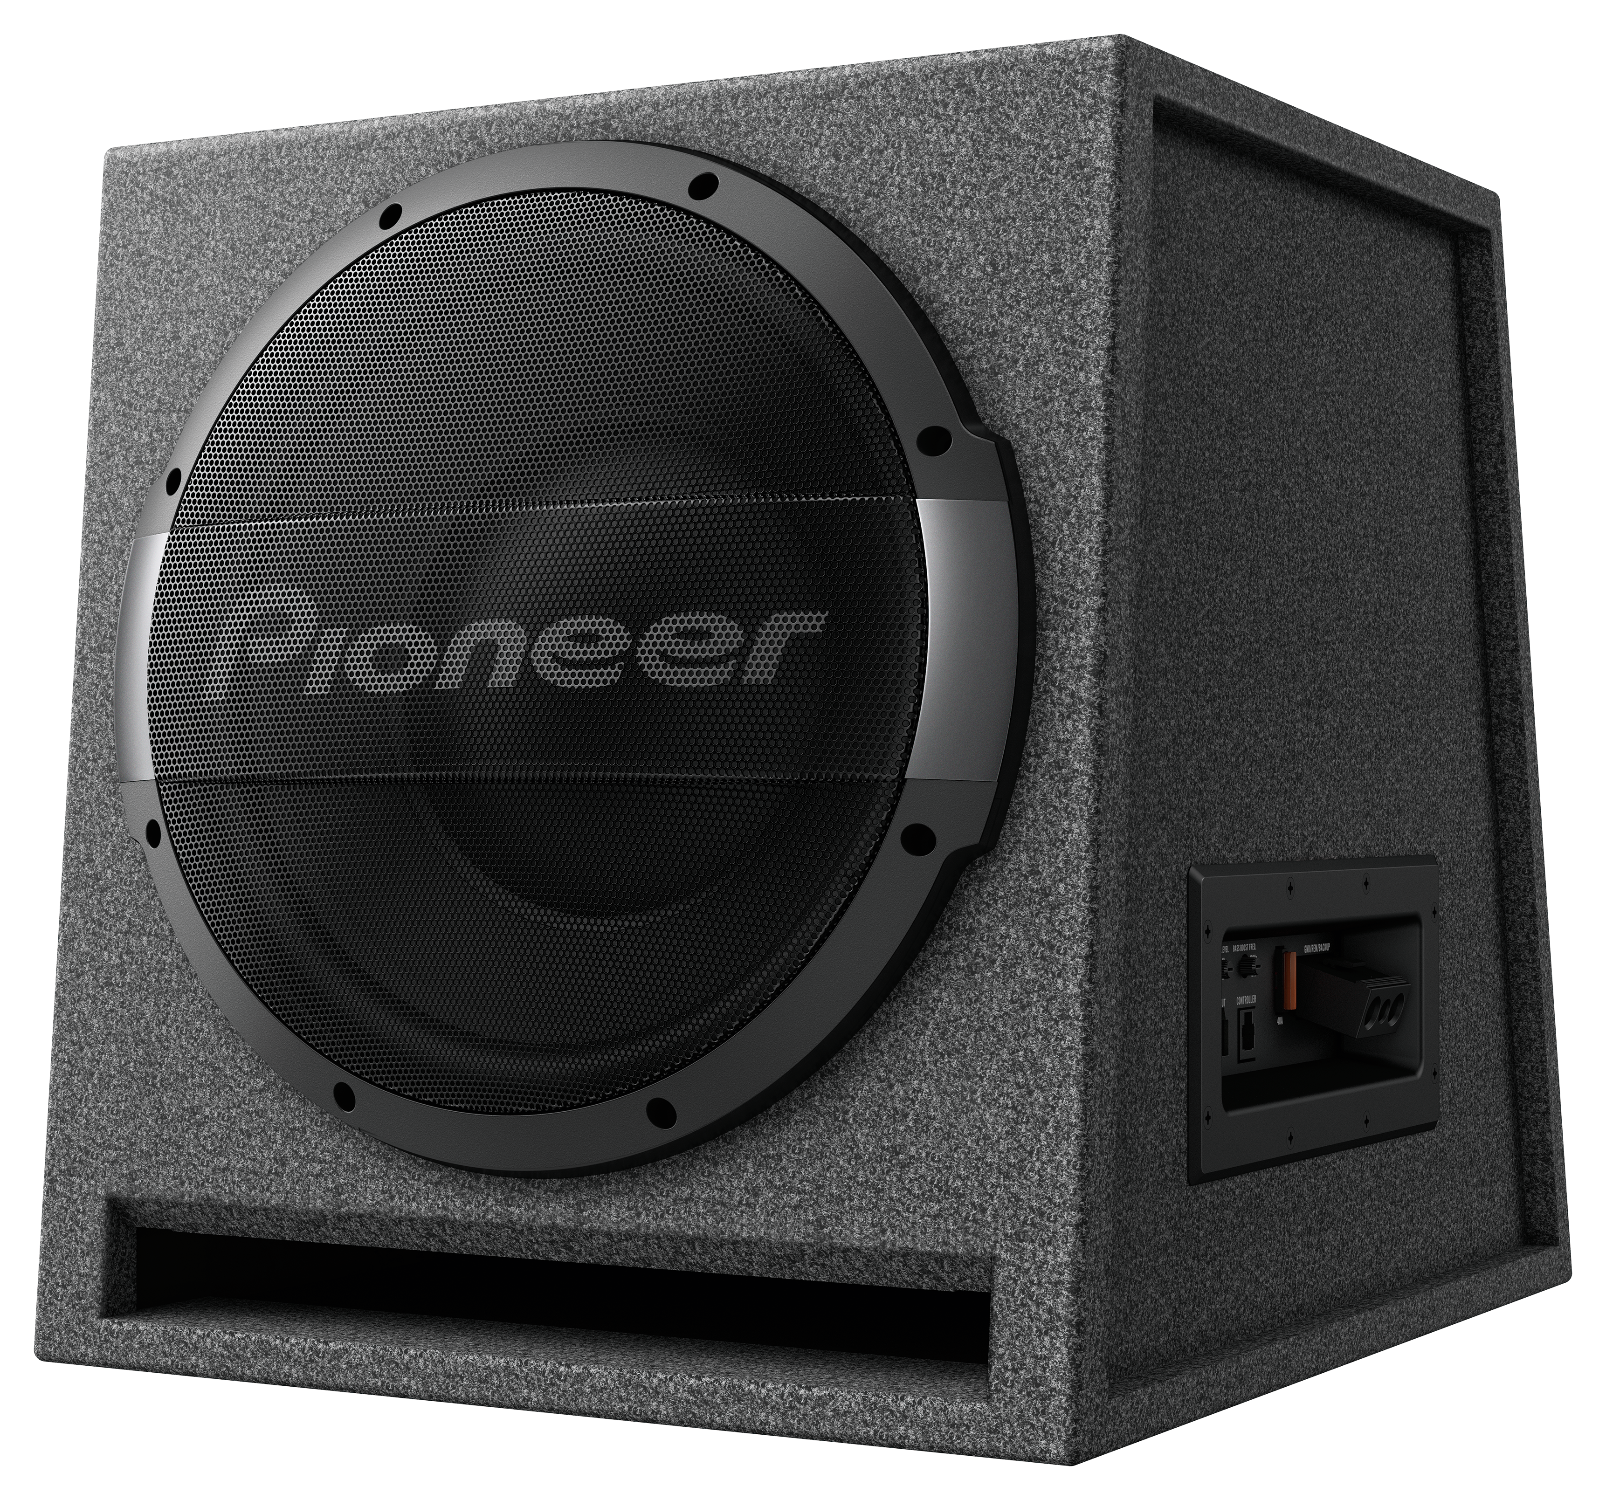 12" - 1500w Max Power, Built-In 600w Output Amplifier - Ported Active Enclosure Subwoofer